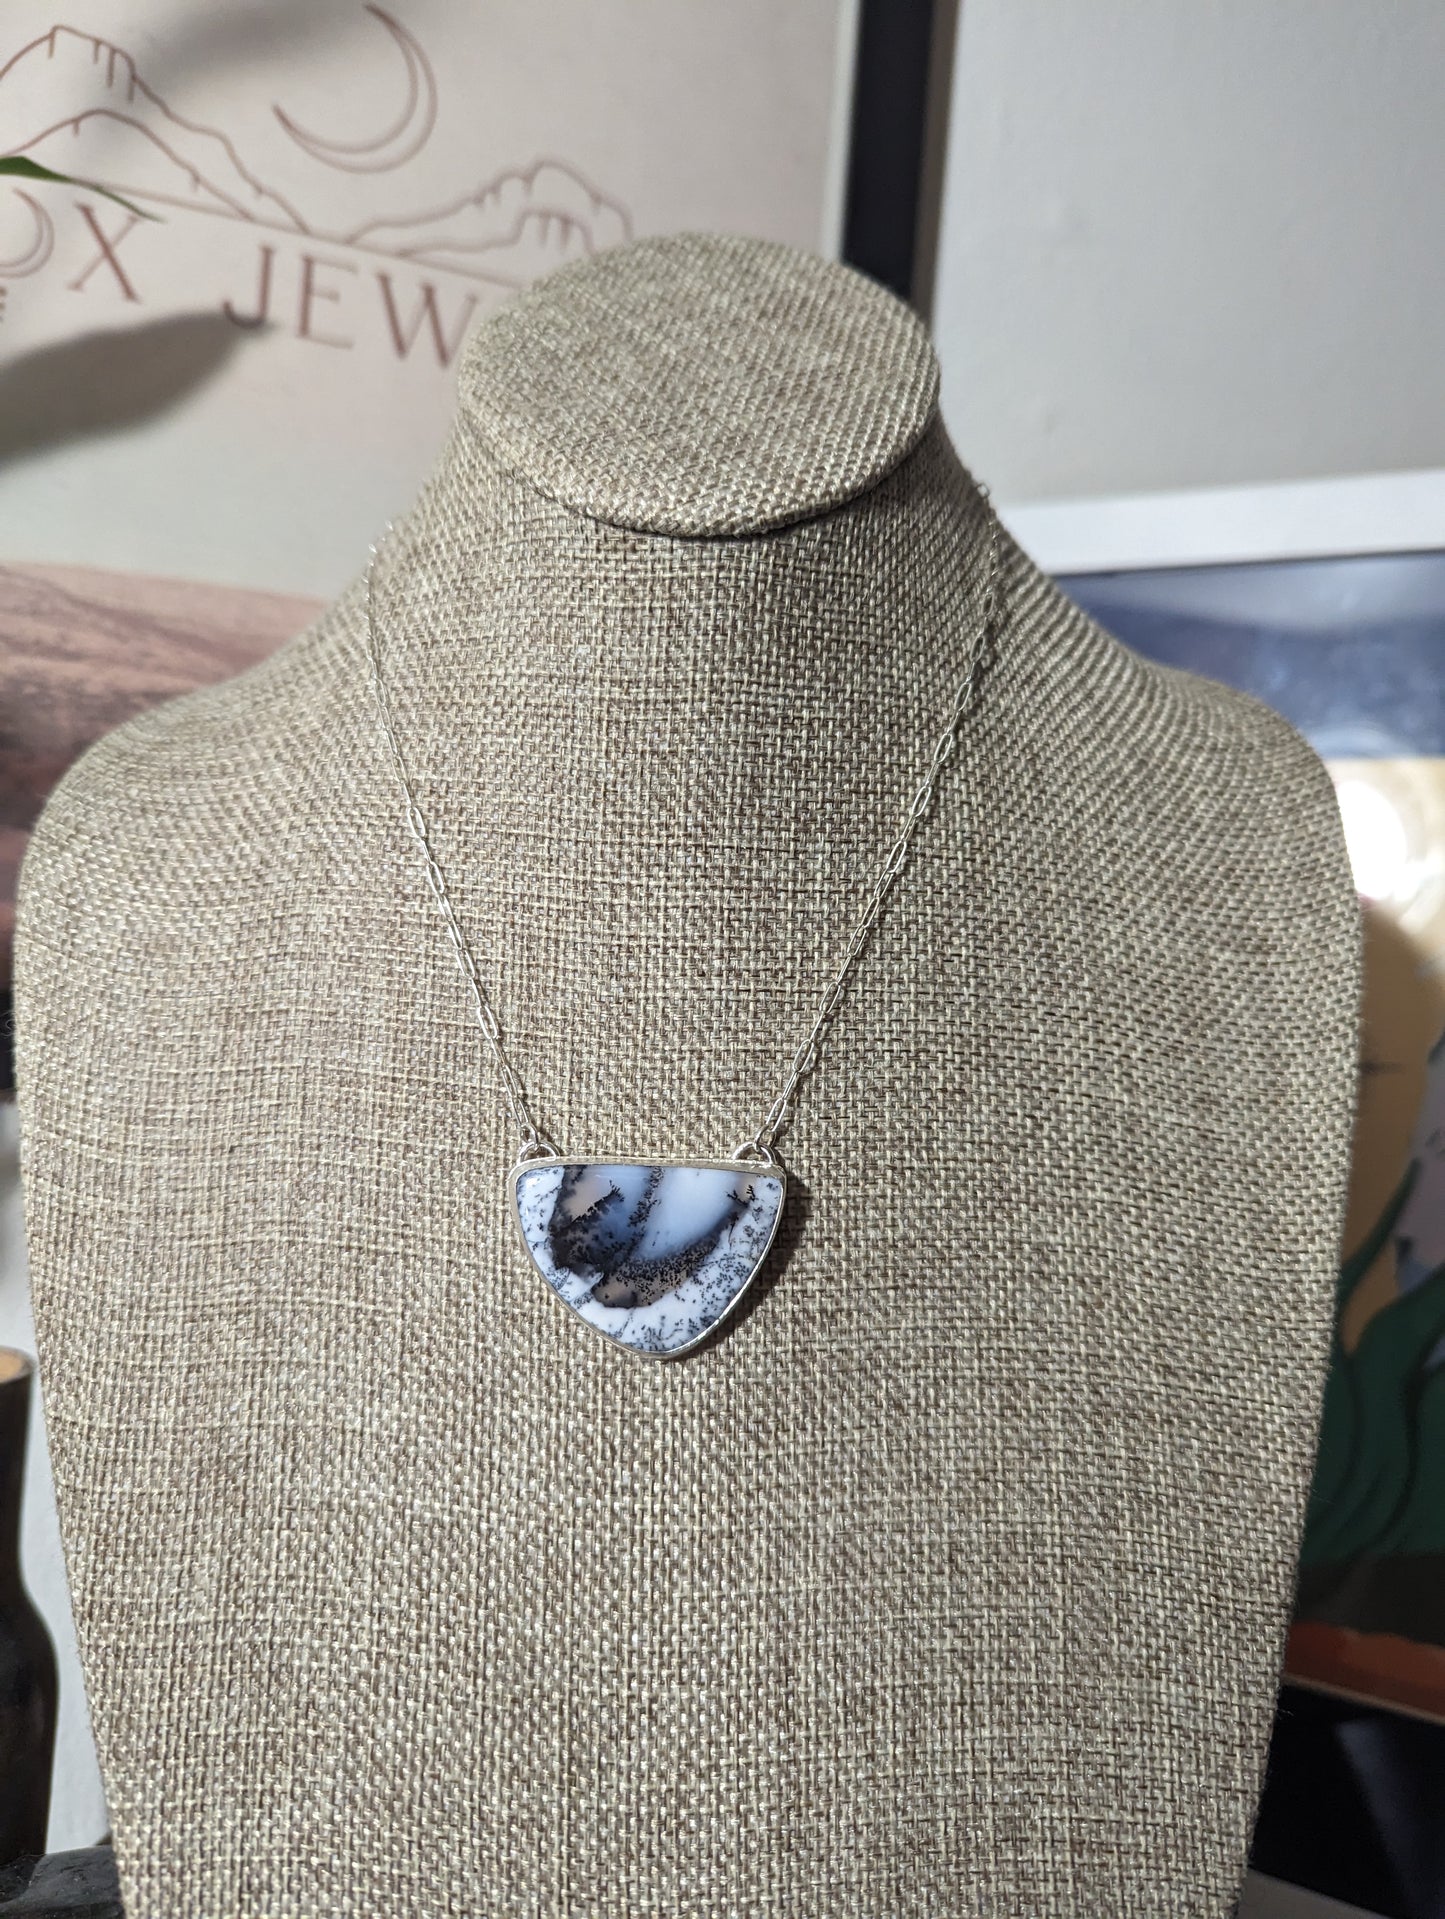 Dendritic Agate Half Moon Sterling Silver Necklace